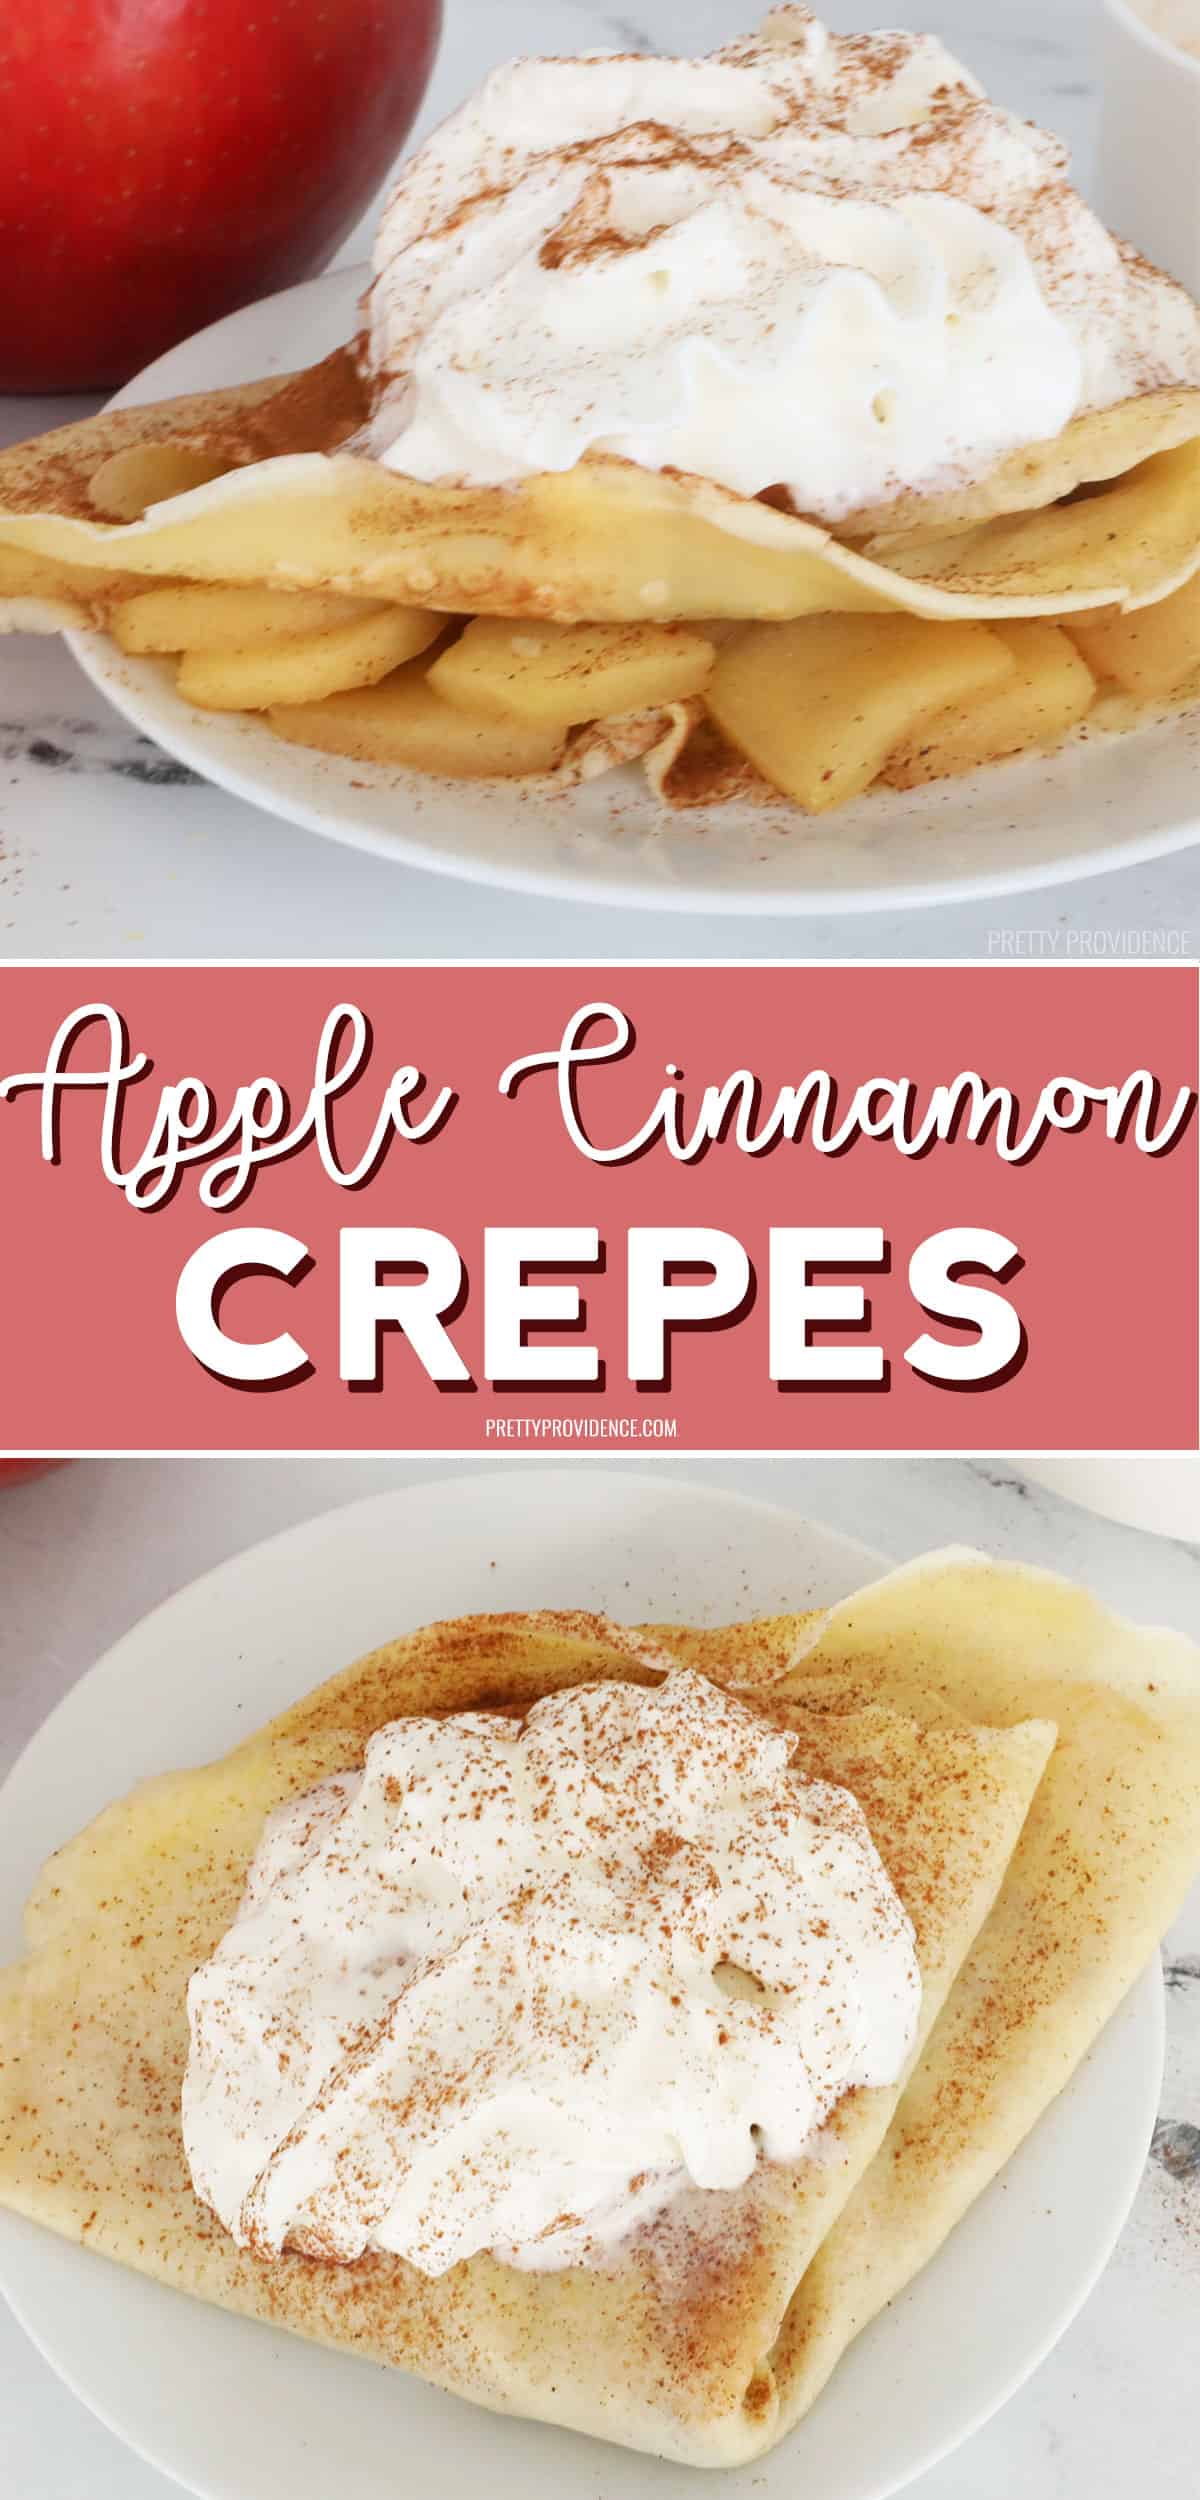 Apple Cinnamon Crepes!!! YUM. This is basically apple pie in crepe form and my whole family LOVES it!!